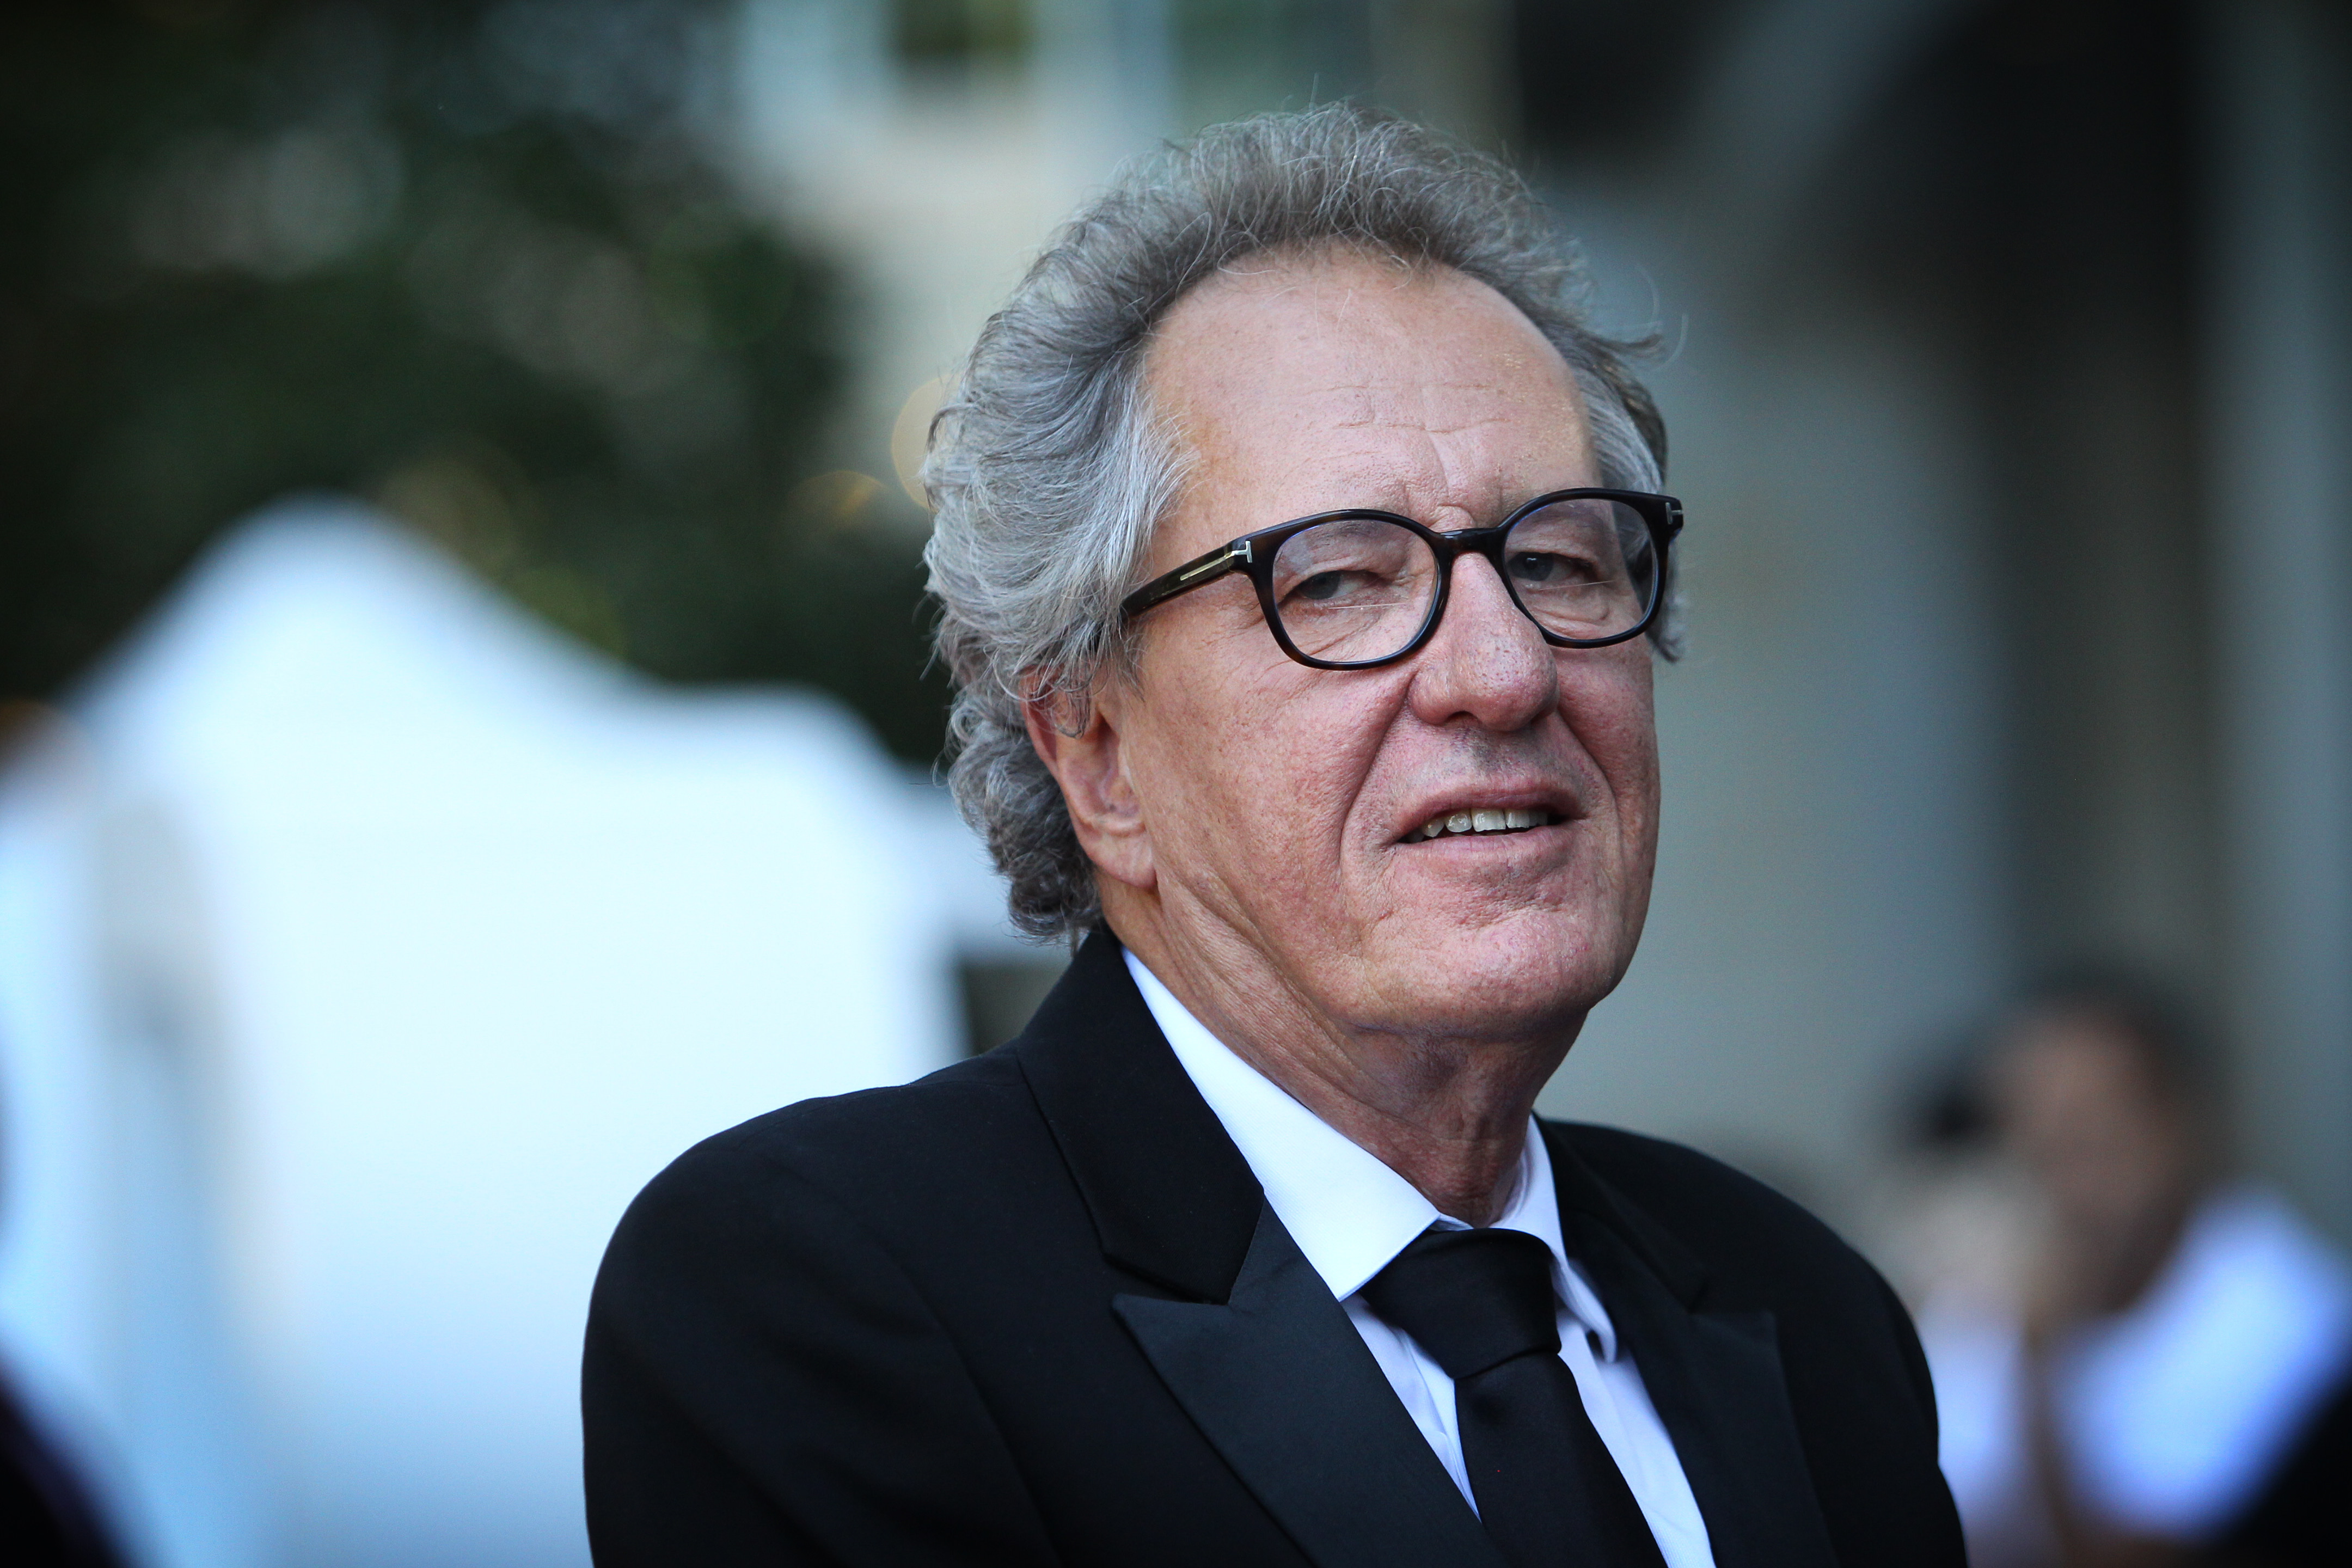 geoffrey Rush Steps Down As President Of Aacta Amid Accusations Indiewire